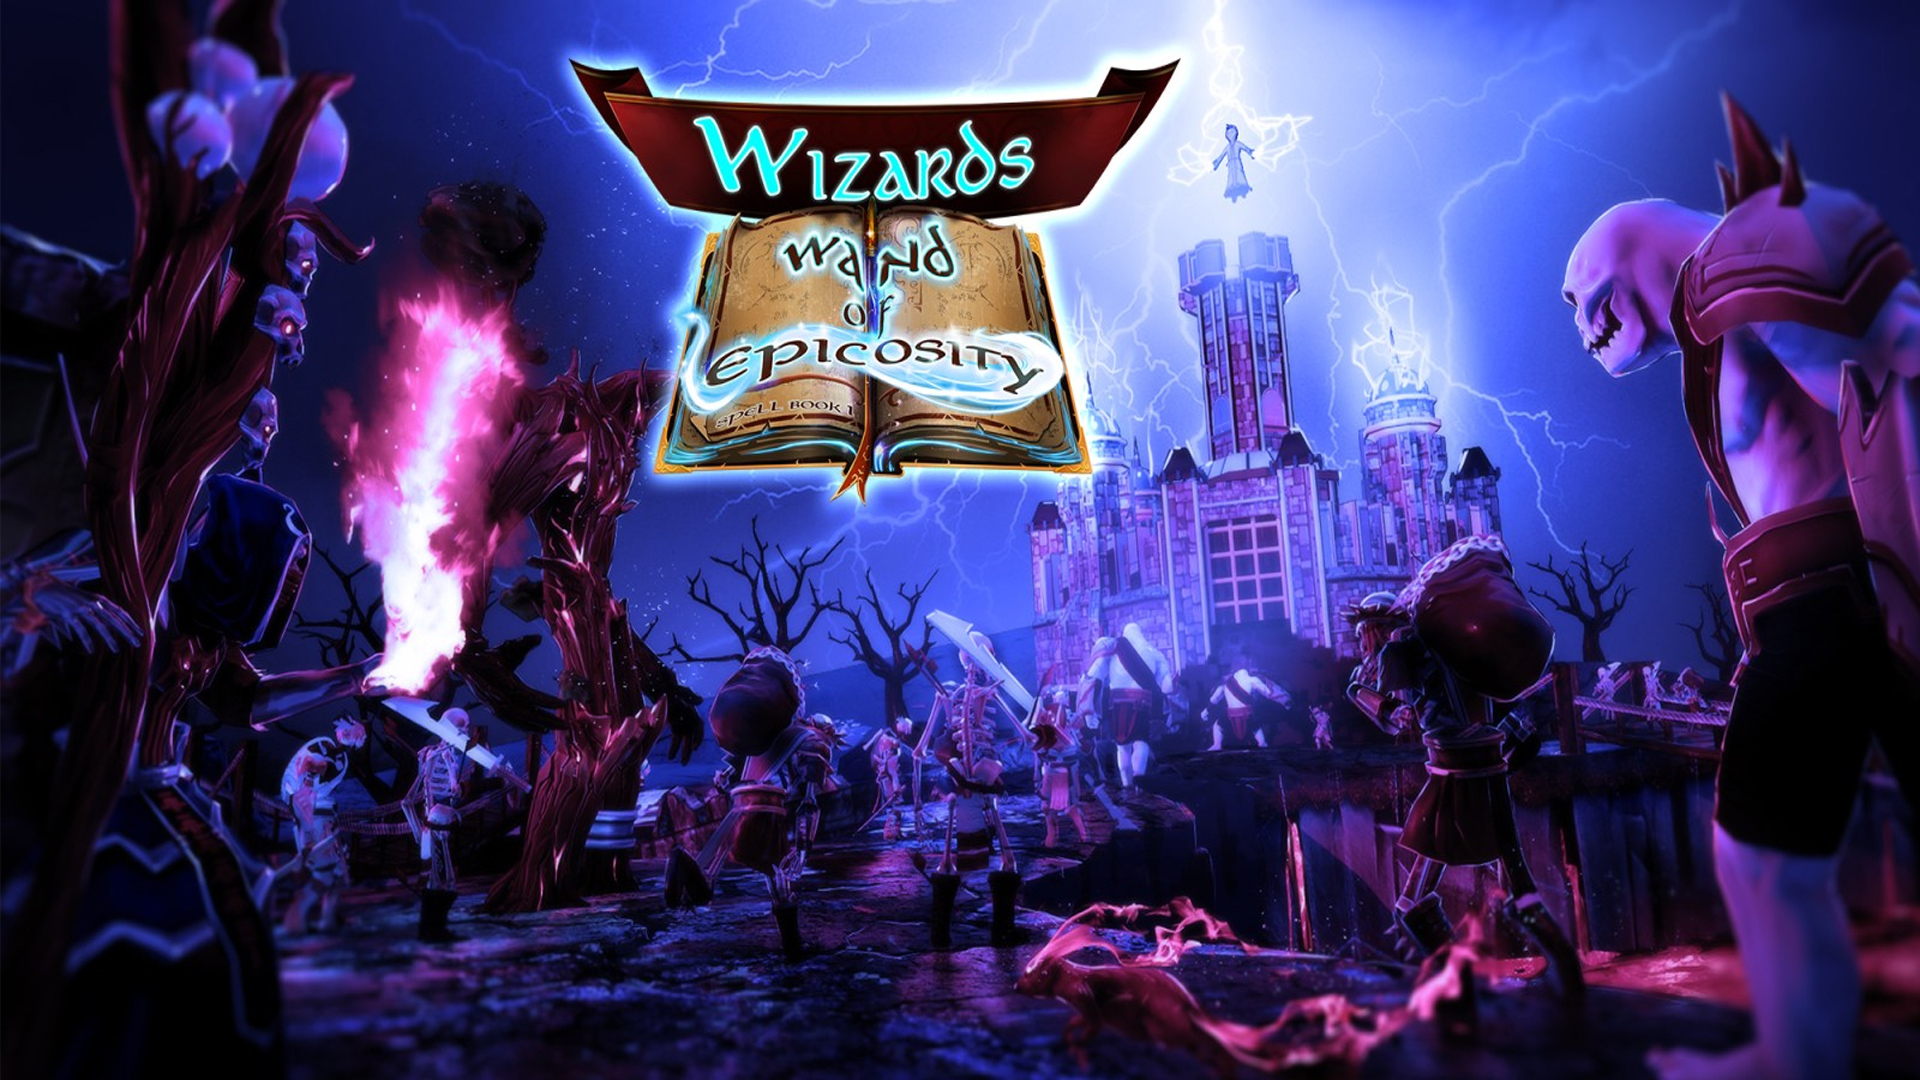 Wizards: Wand of Epicosity instal the new version for ios